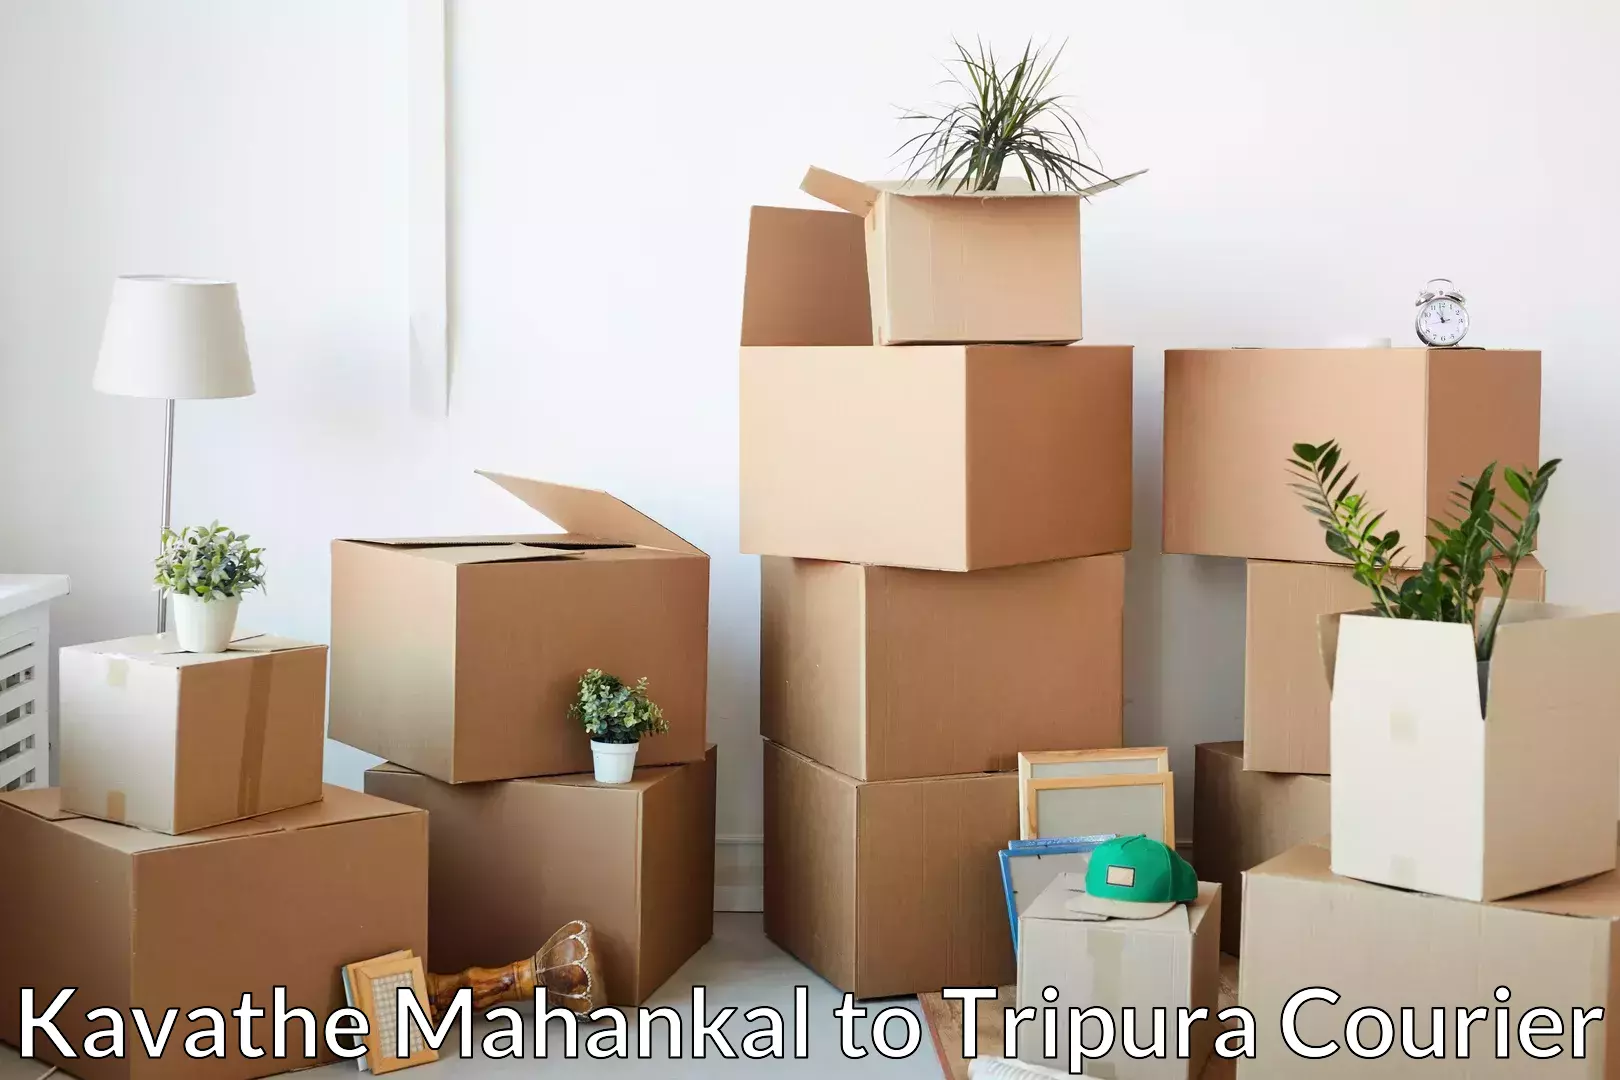 Cost-effective moving options Kavathe Mahankal to South Tripura